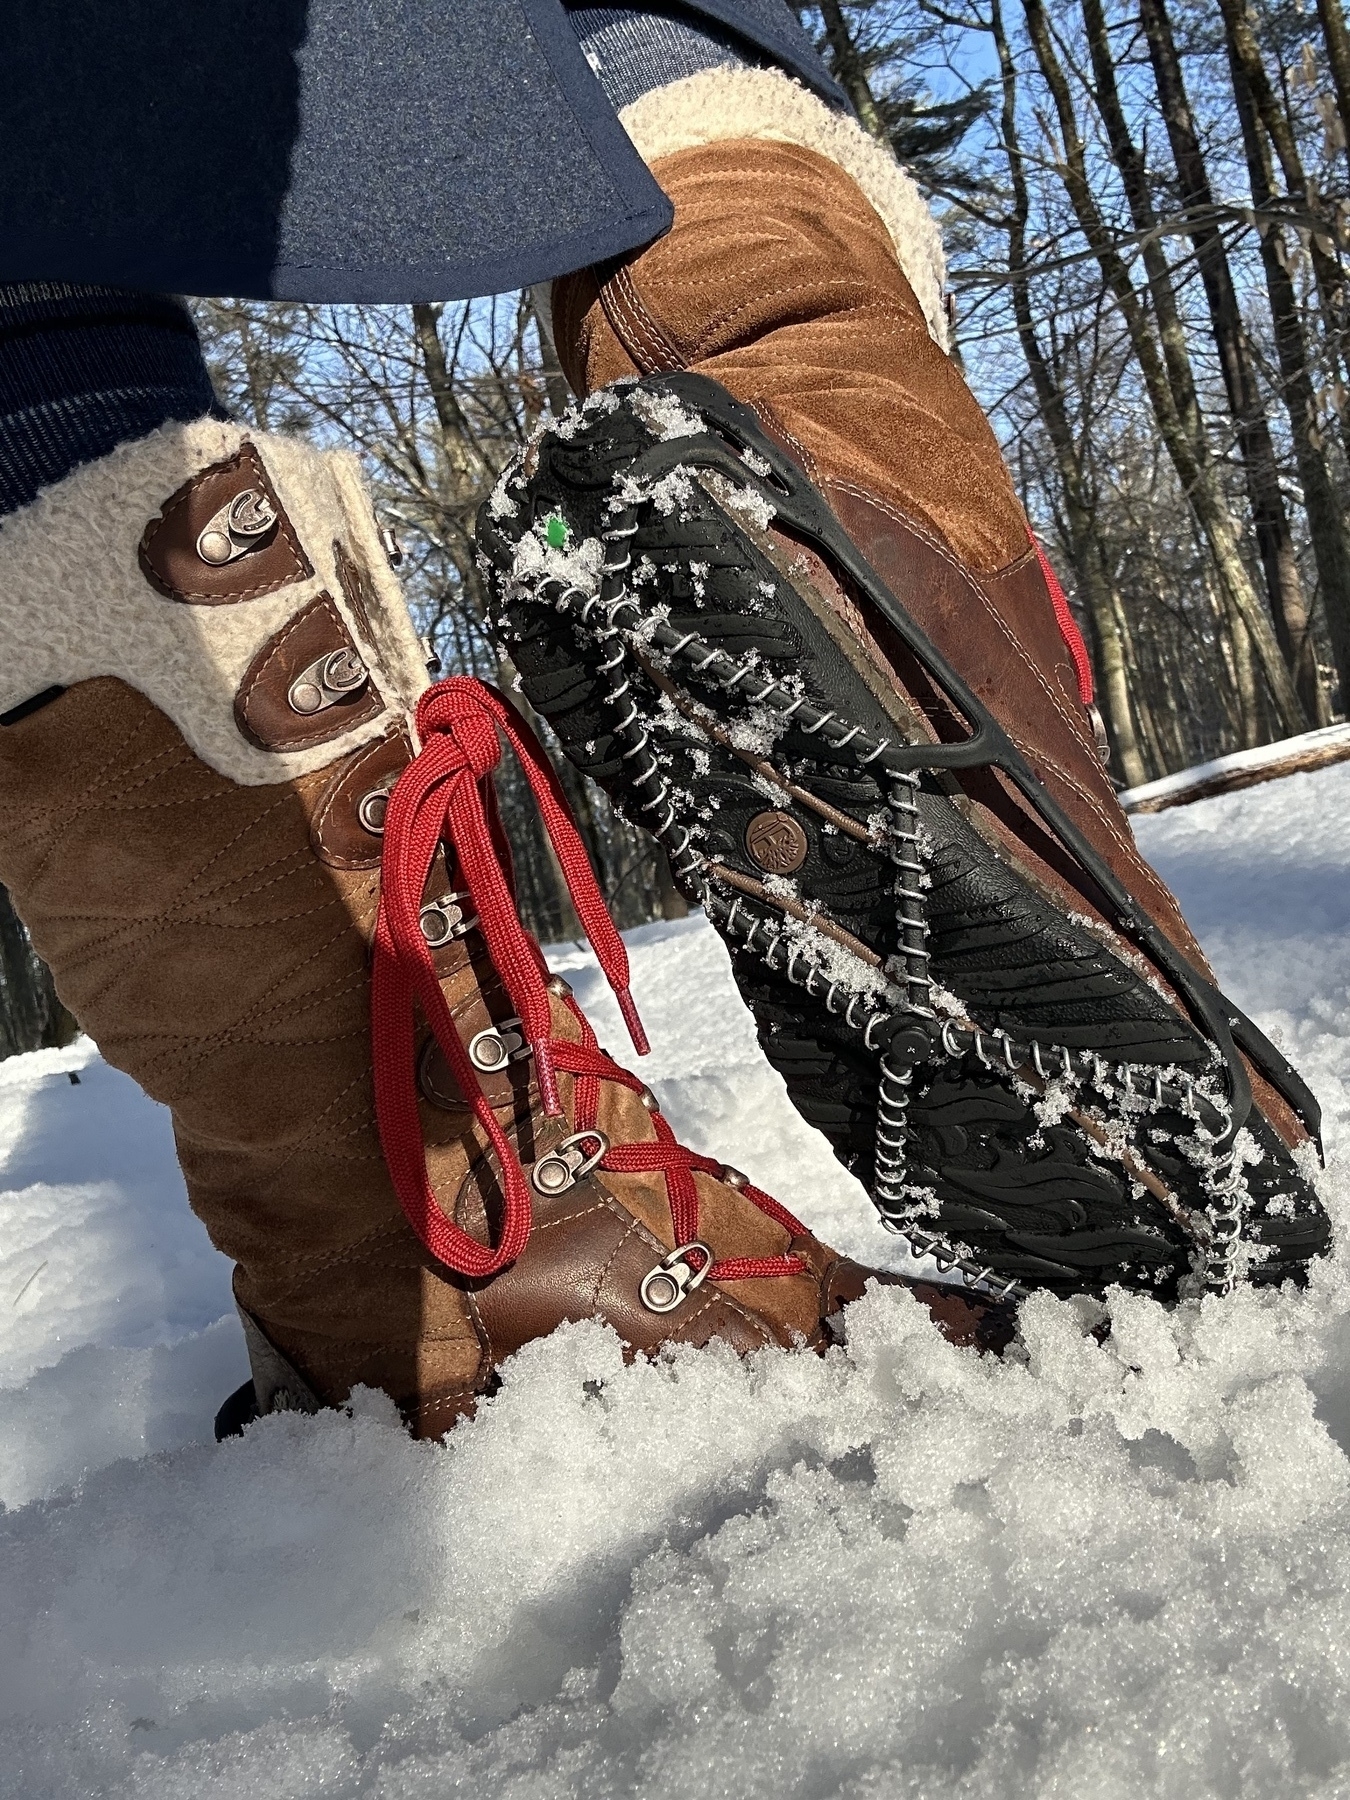 A pair of snow boots in the snow, with Yak Trax on for greater traction while walking on ice